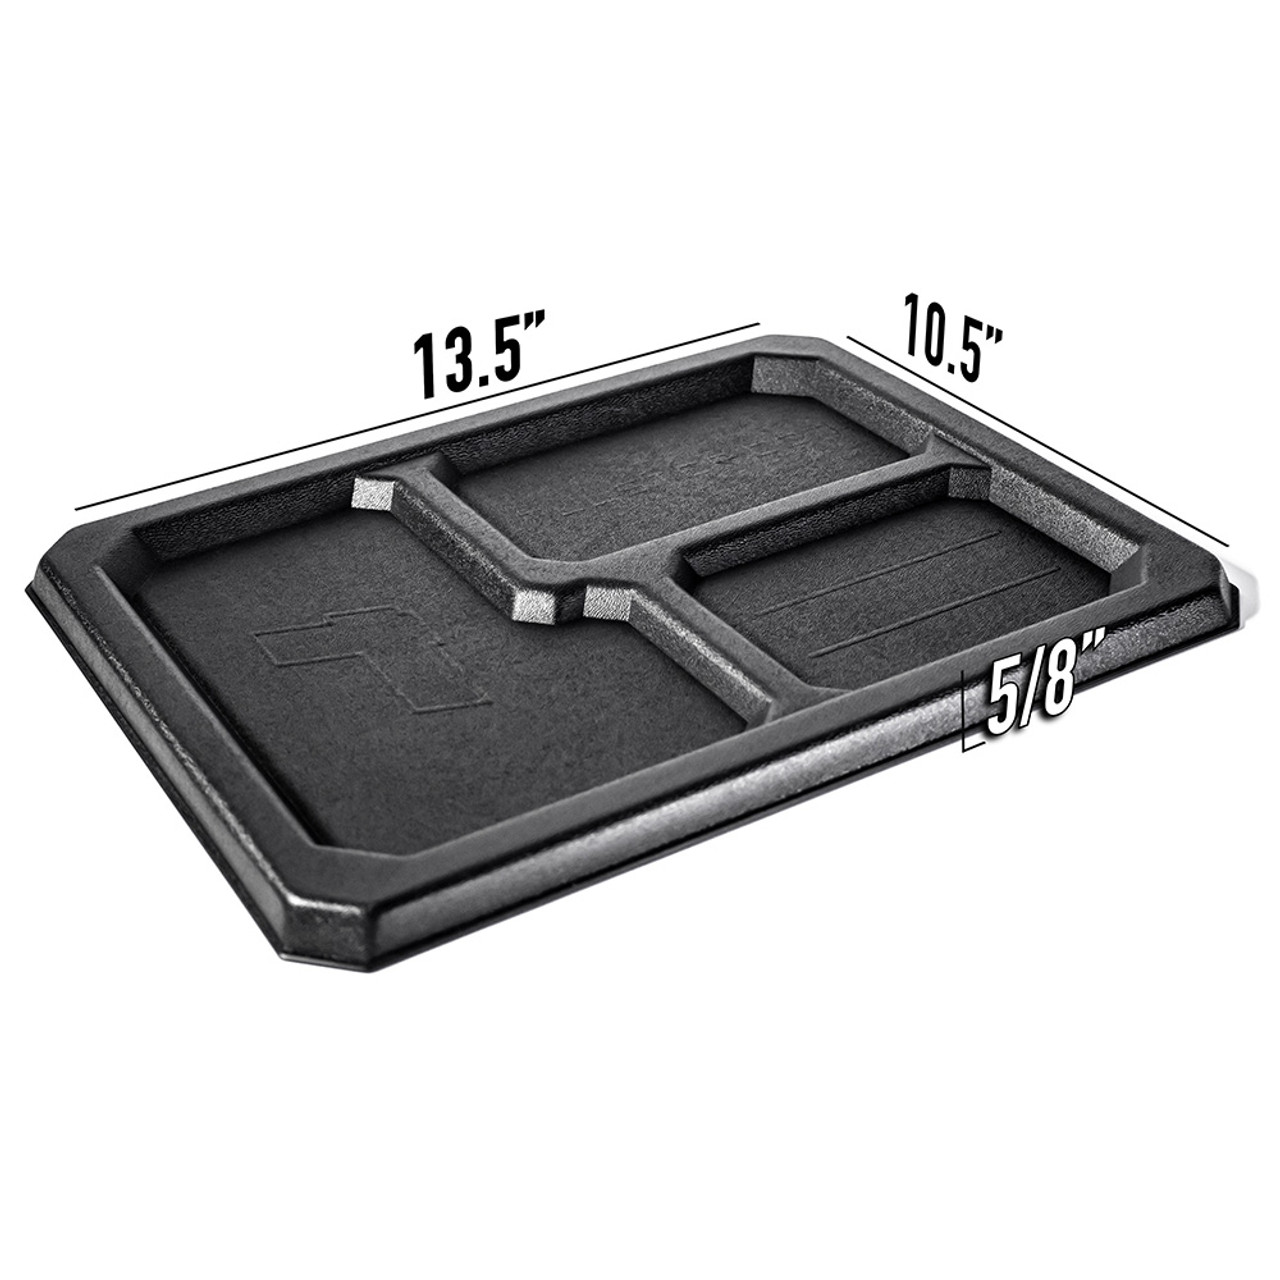 The Delta EDC Tray - Black, Large | Tulster